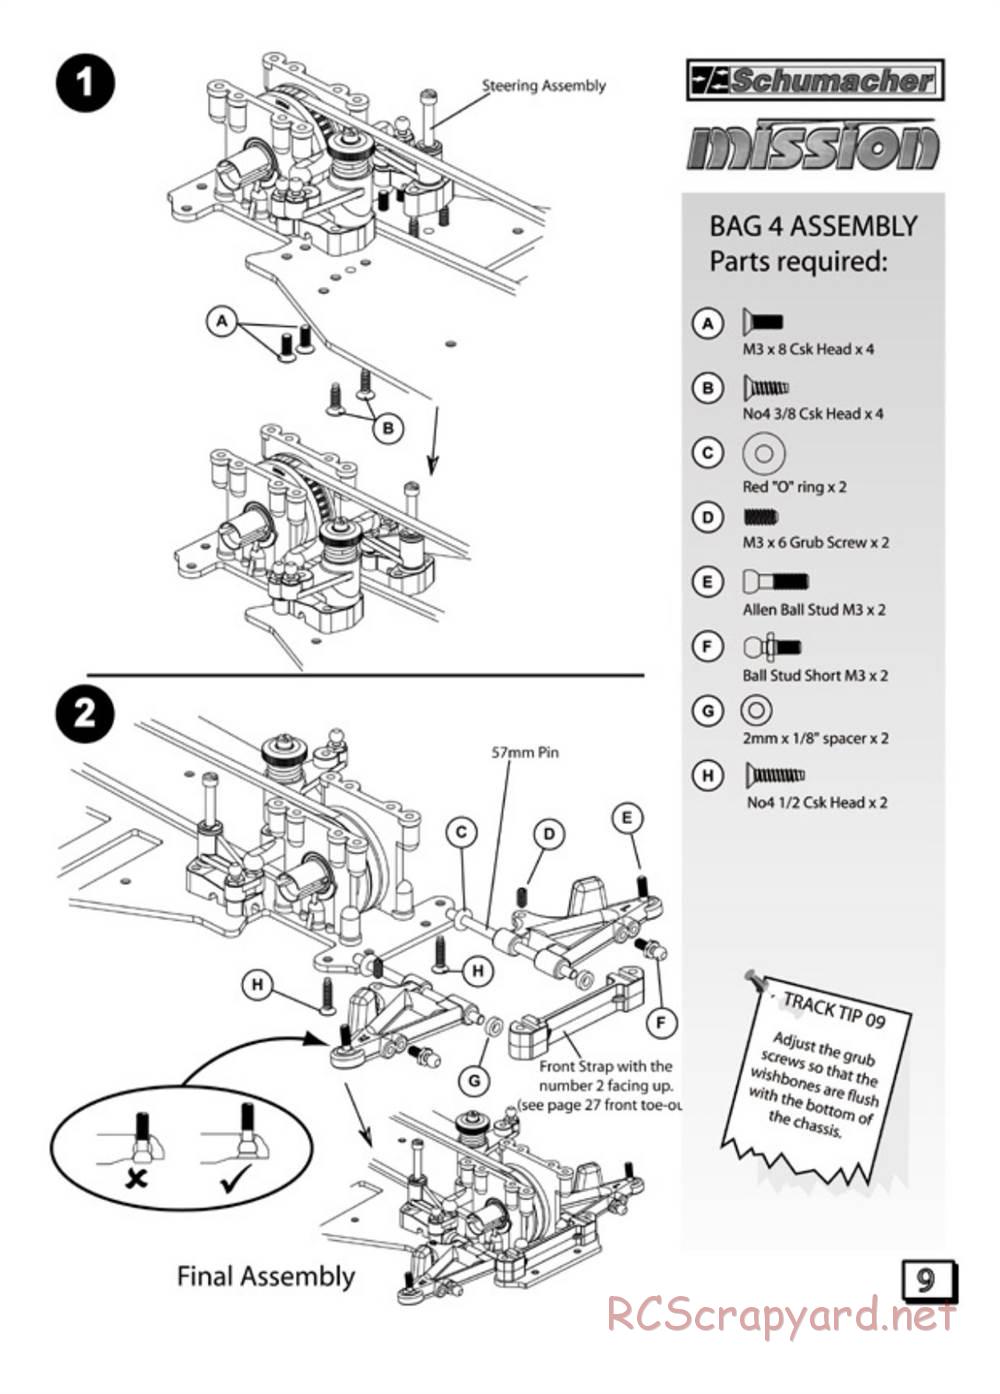 Schumacher - Mission - Manual - Page 10